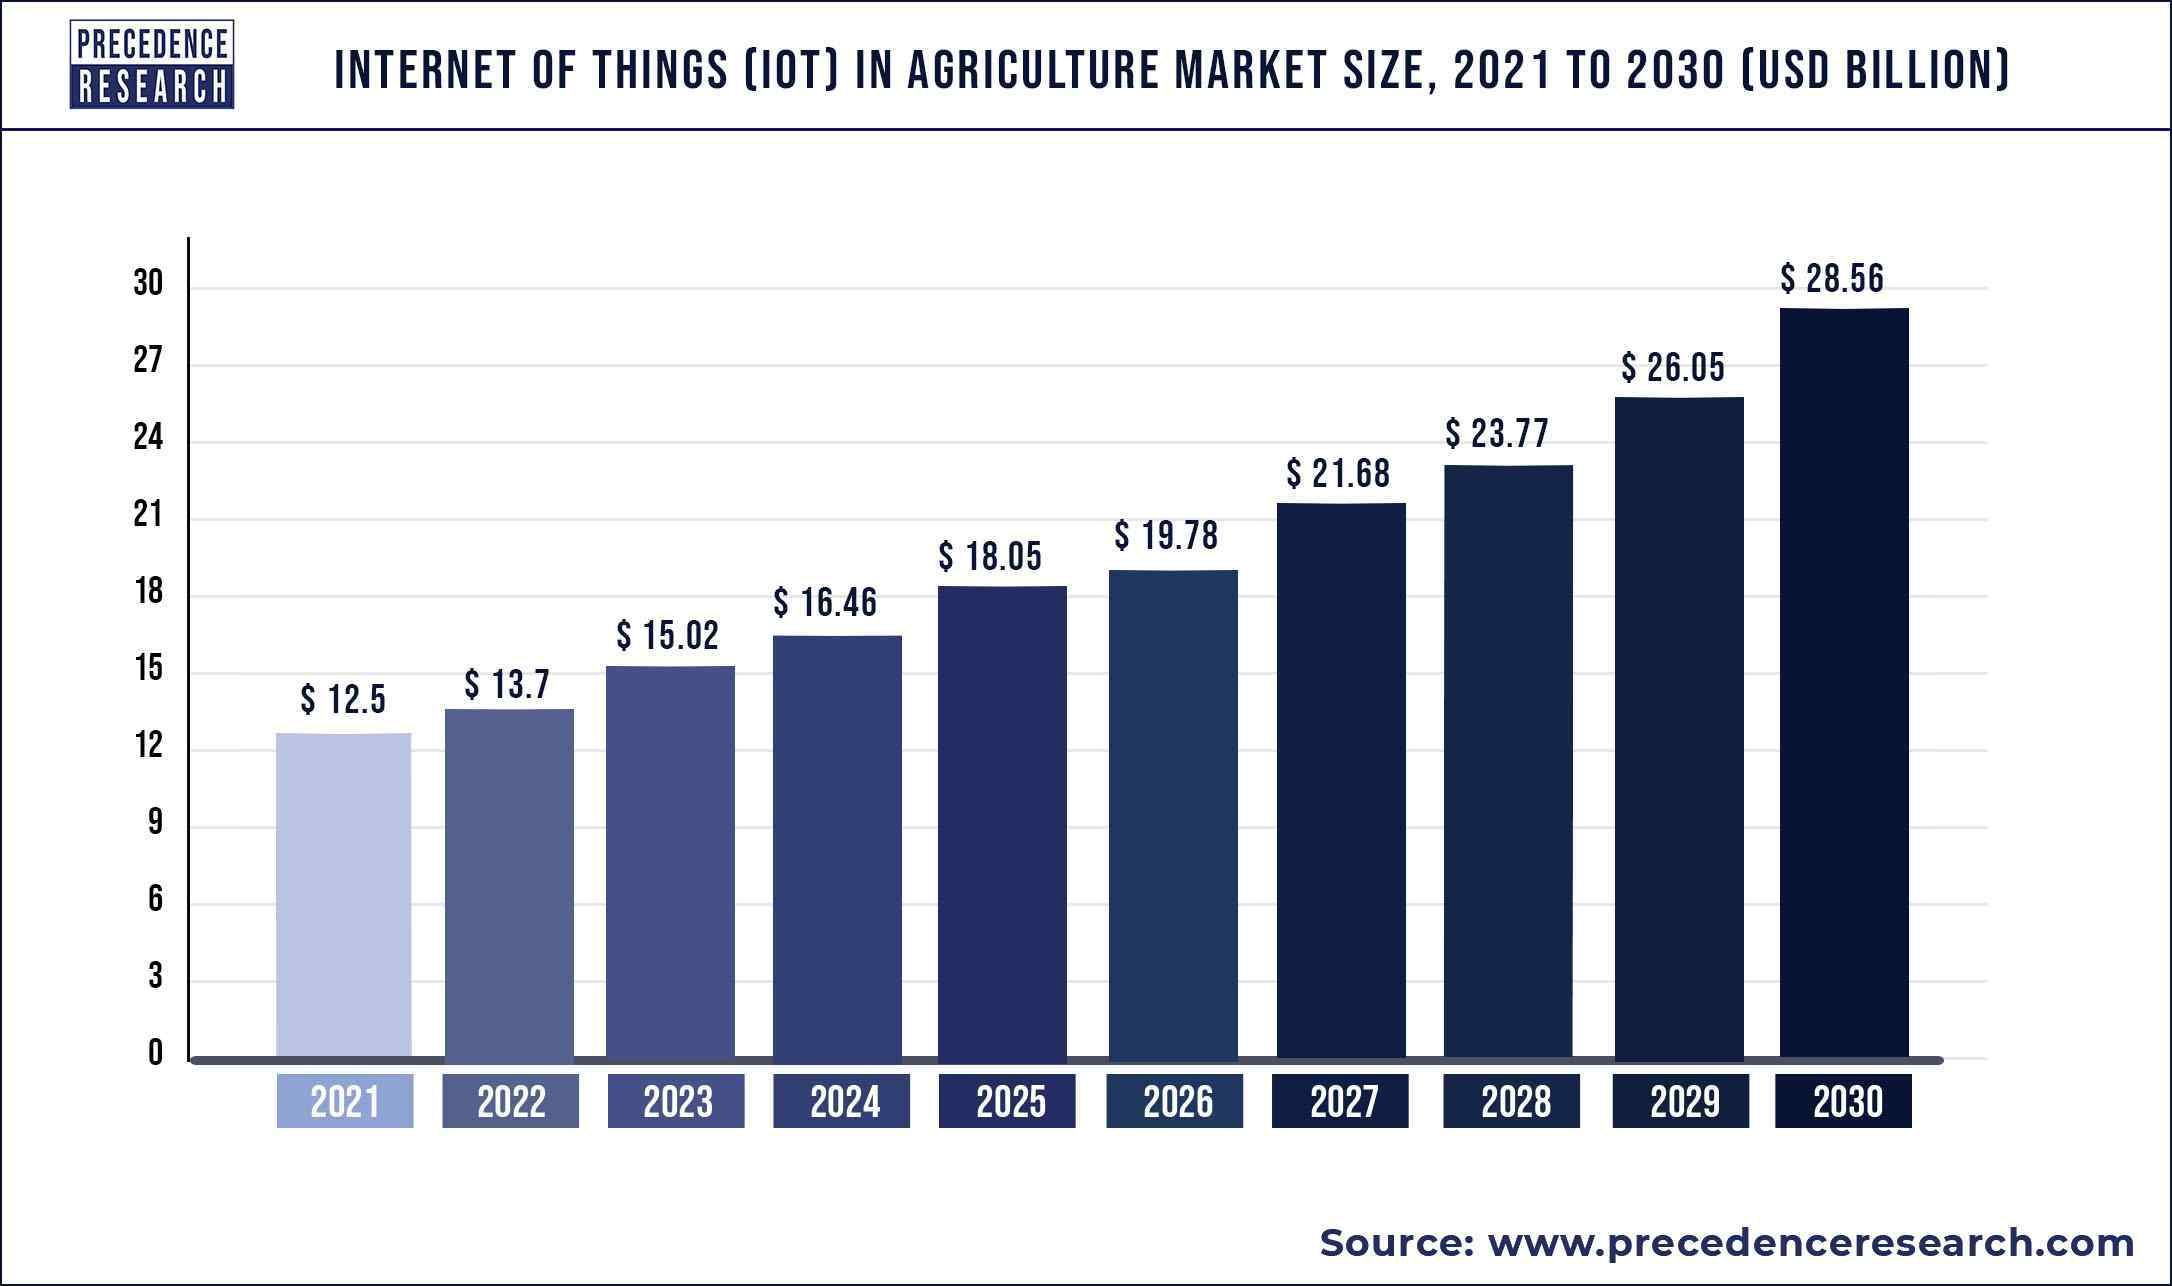 Internet of Things in Agriculture